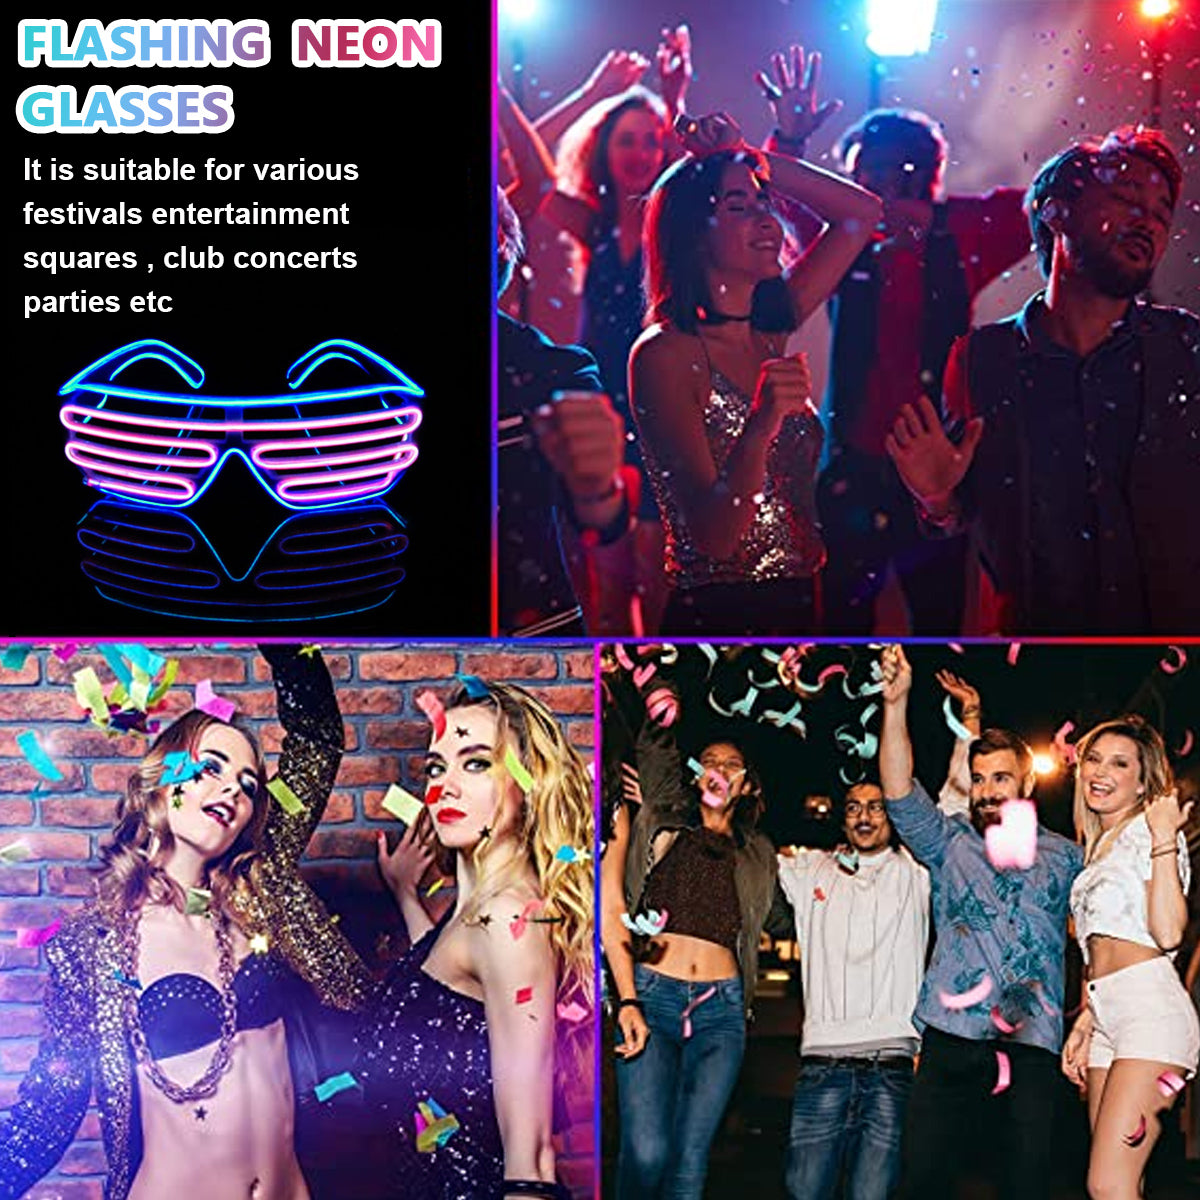 PATPAT Party Glasses, Light Up Flashing Shutter Neon Glasses, Two-Tone Glasses Glow in The Dark for Rave Party, Halloween, Christmas, 3 Light Modes (Blue - Pink)